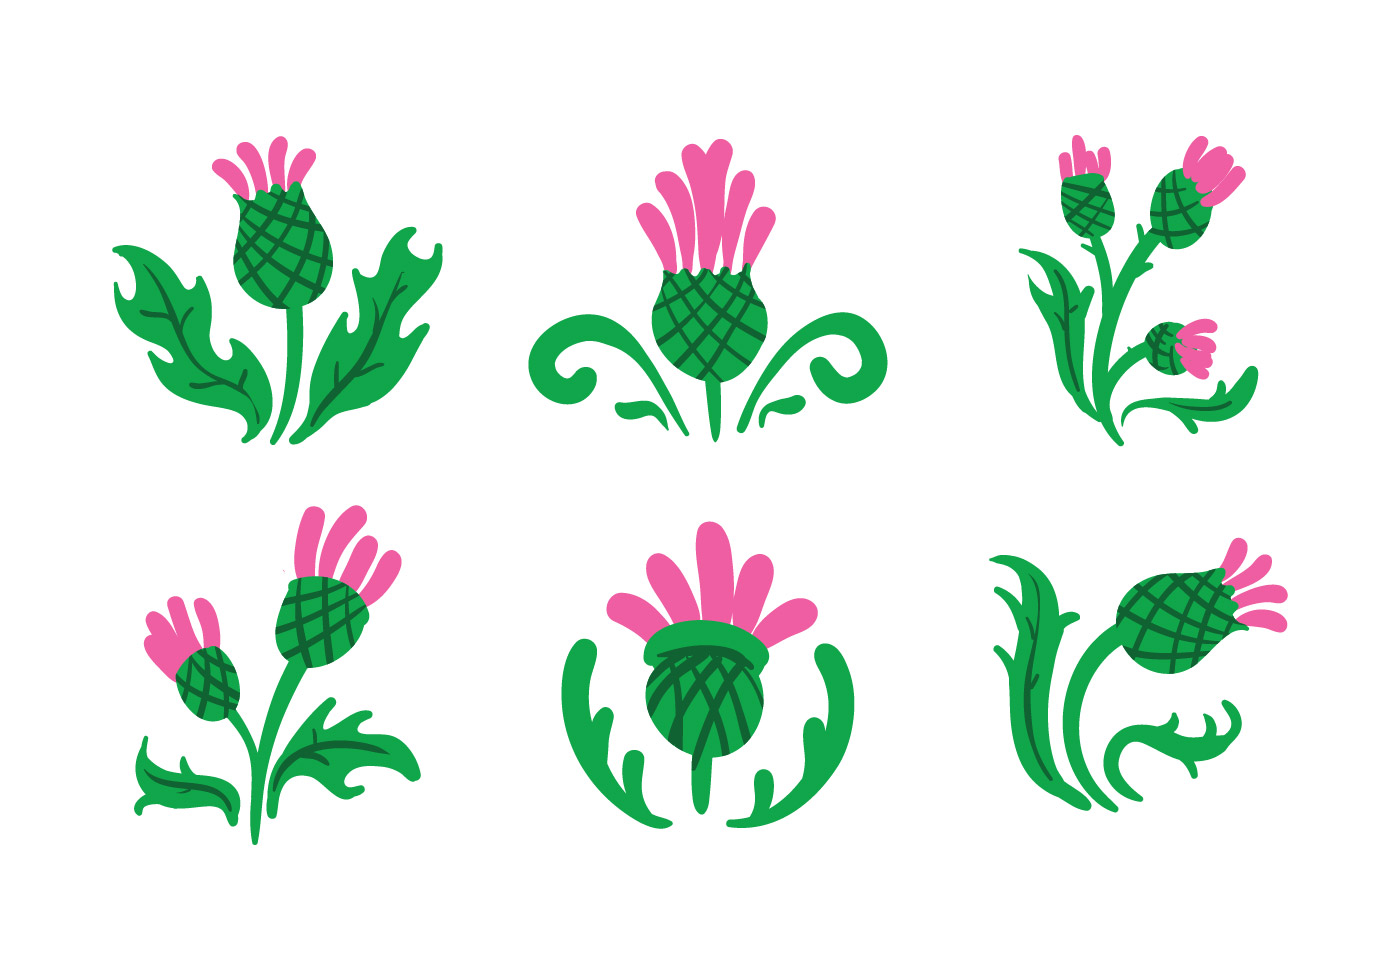 Thistle Free Vector Art - (999 Free Downloads)